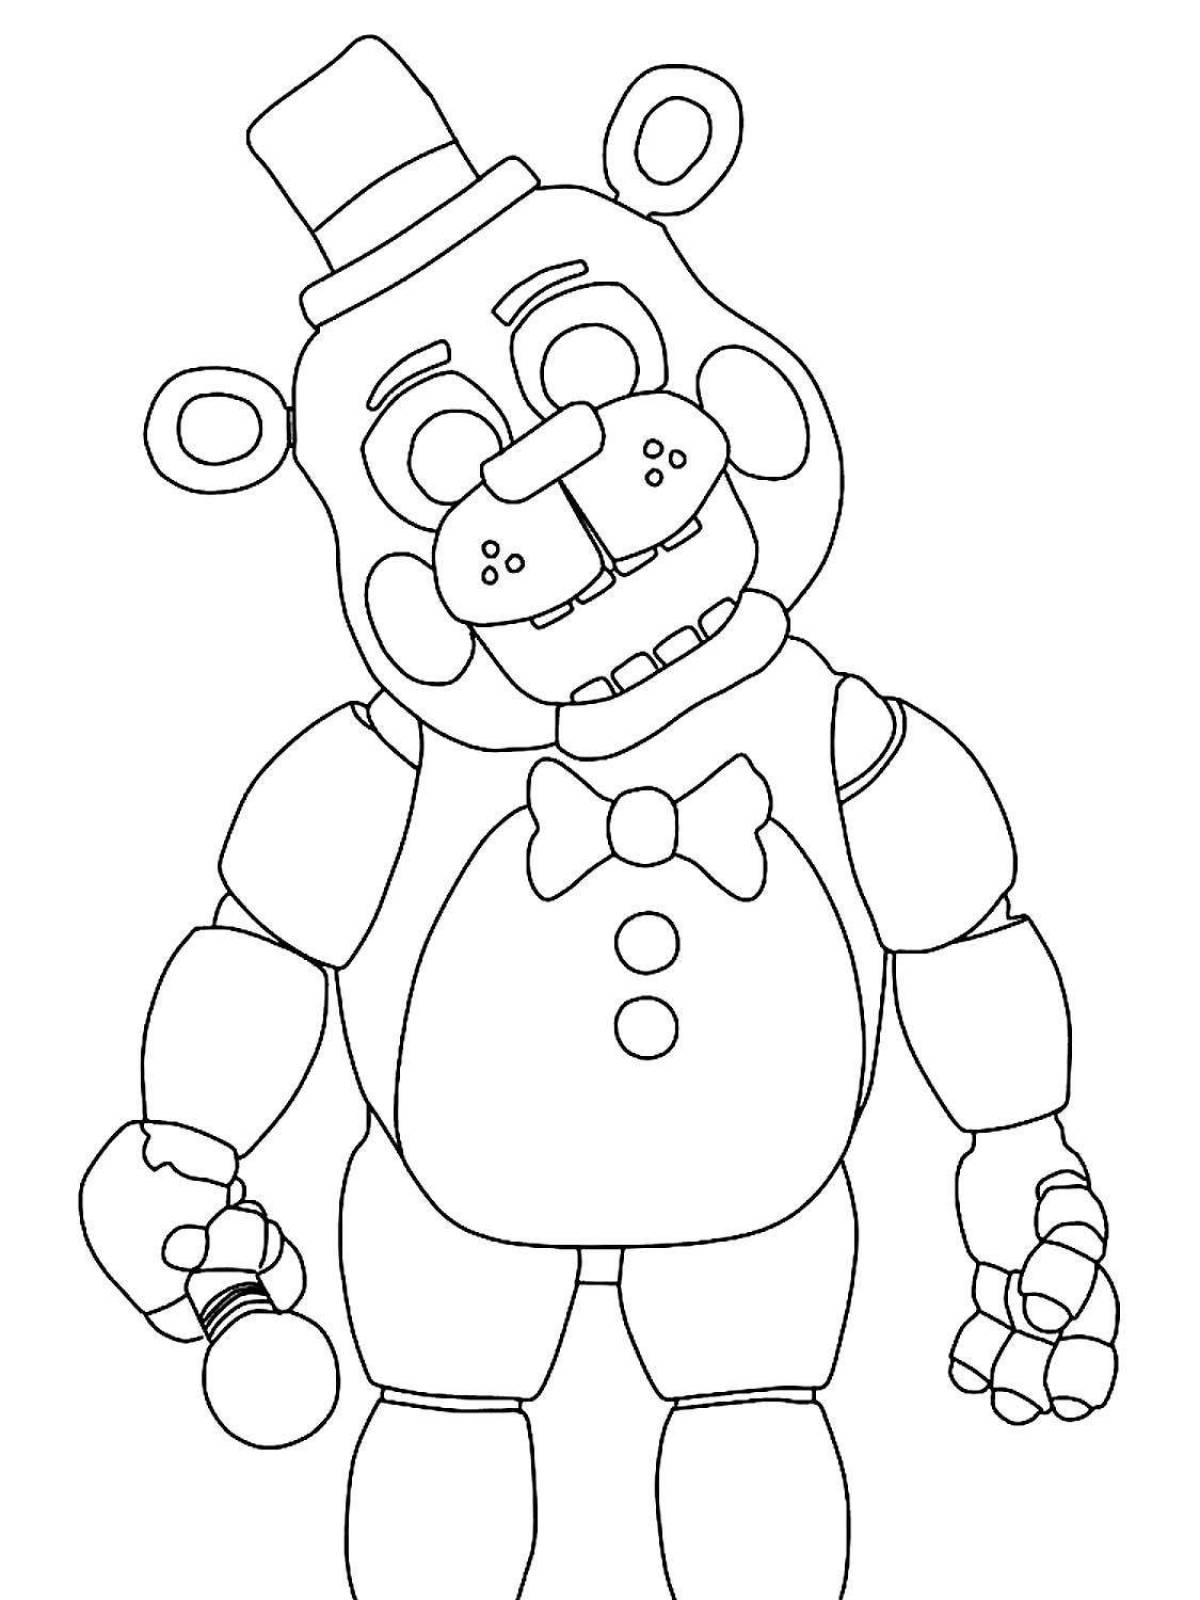 Colorful fnaf2 coloring page